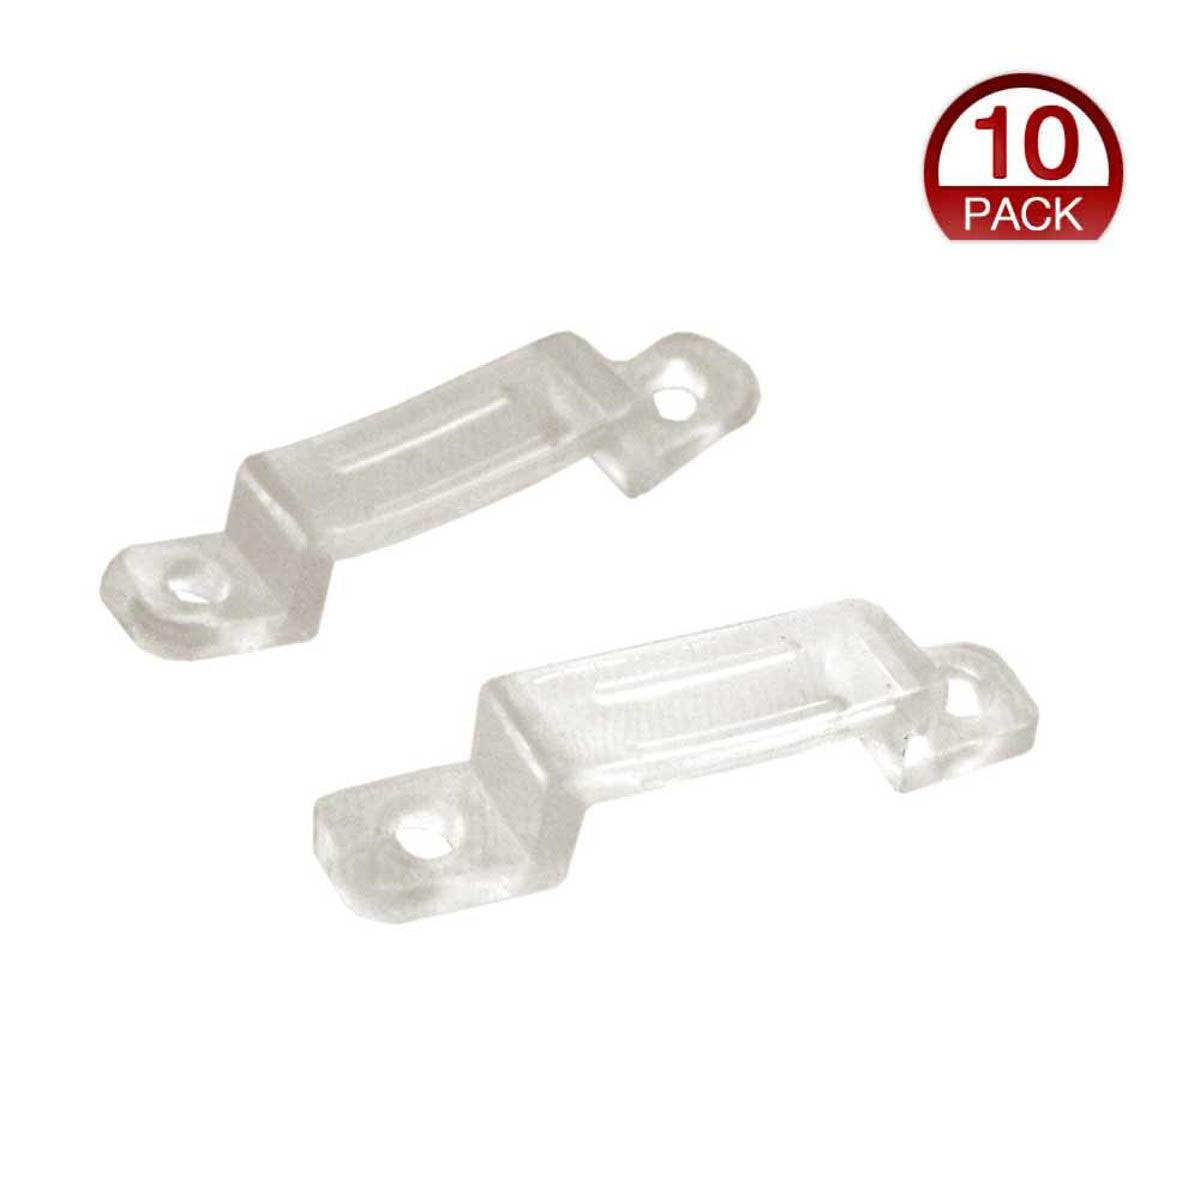 Mounting Clips for Wet Location Strip Lights, Pack of 10 - Bees Lighting